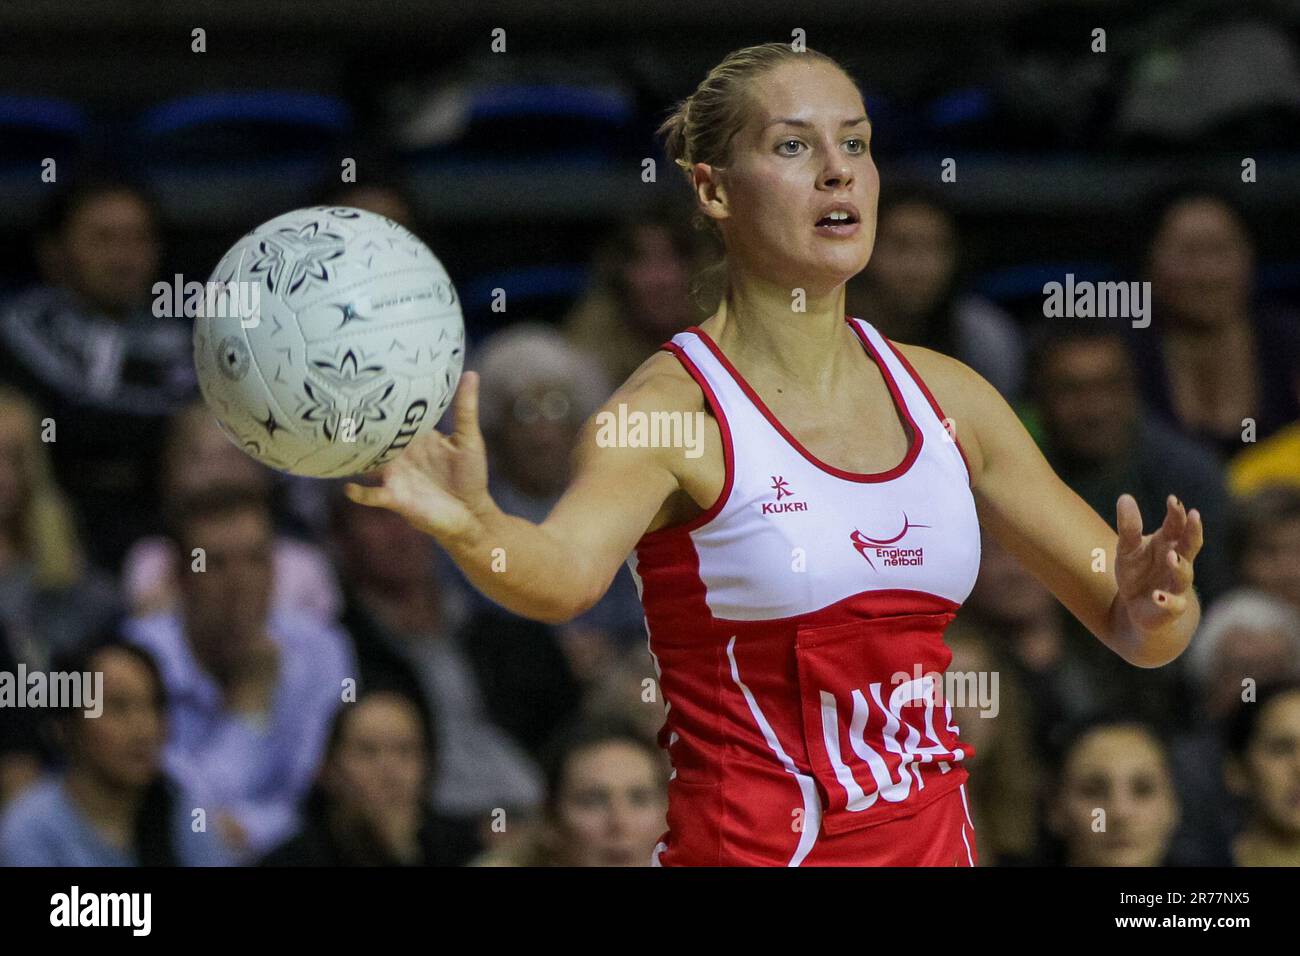 England’s Tamsin Greenaway in action against England during a New World Netball Series match, Trusts Stadium, Auckland, New Zealand, Monday, October 03, 2011. Stock Photo